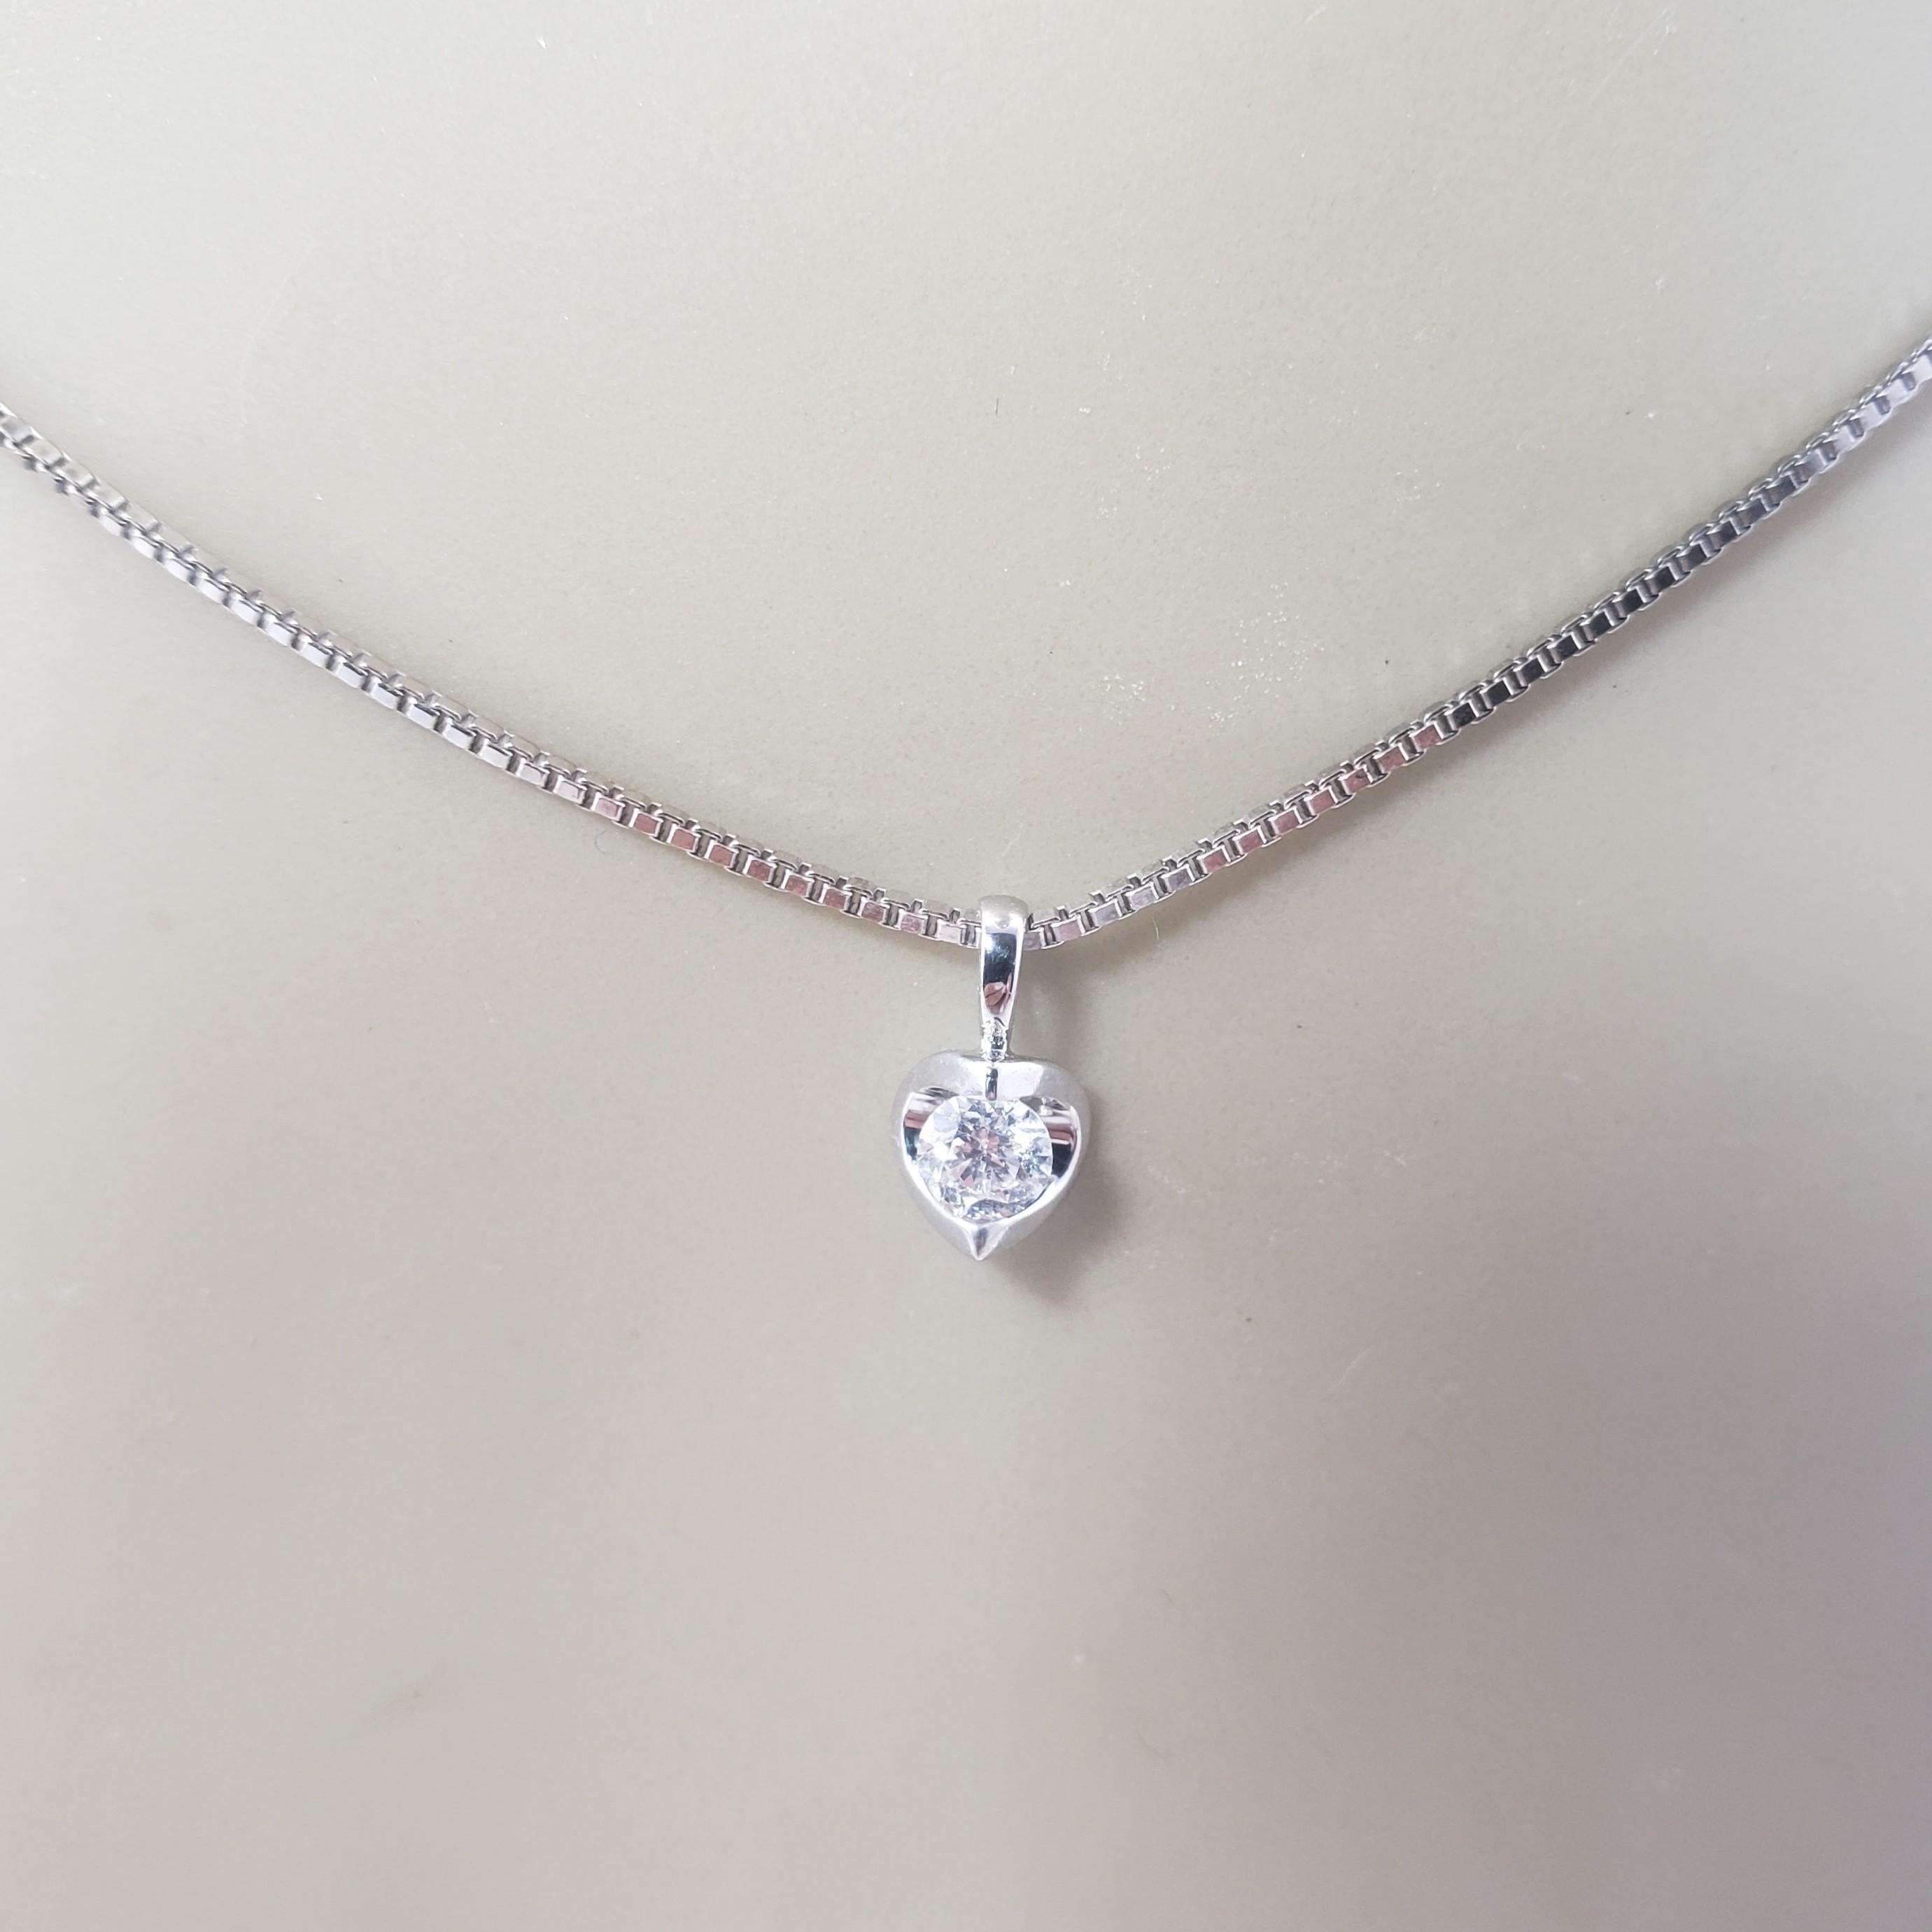 Vintage 14 Karat White Gold Diamond Pendant Necklace-

This lovely solitaire pendant features one round brilliant cut diamond set in classic 14K white gold. Suspends from a classic box chain.

Approximate total diamond weight: .18 ct.

Diamond